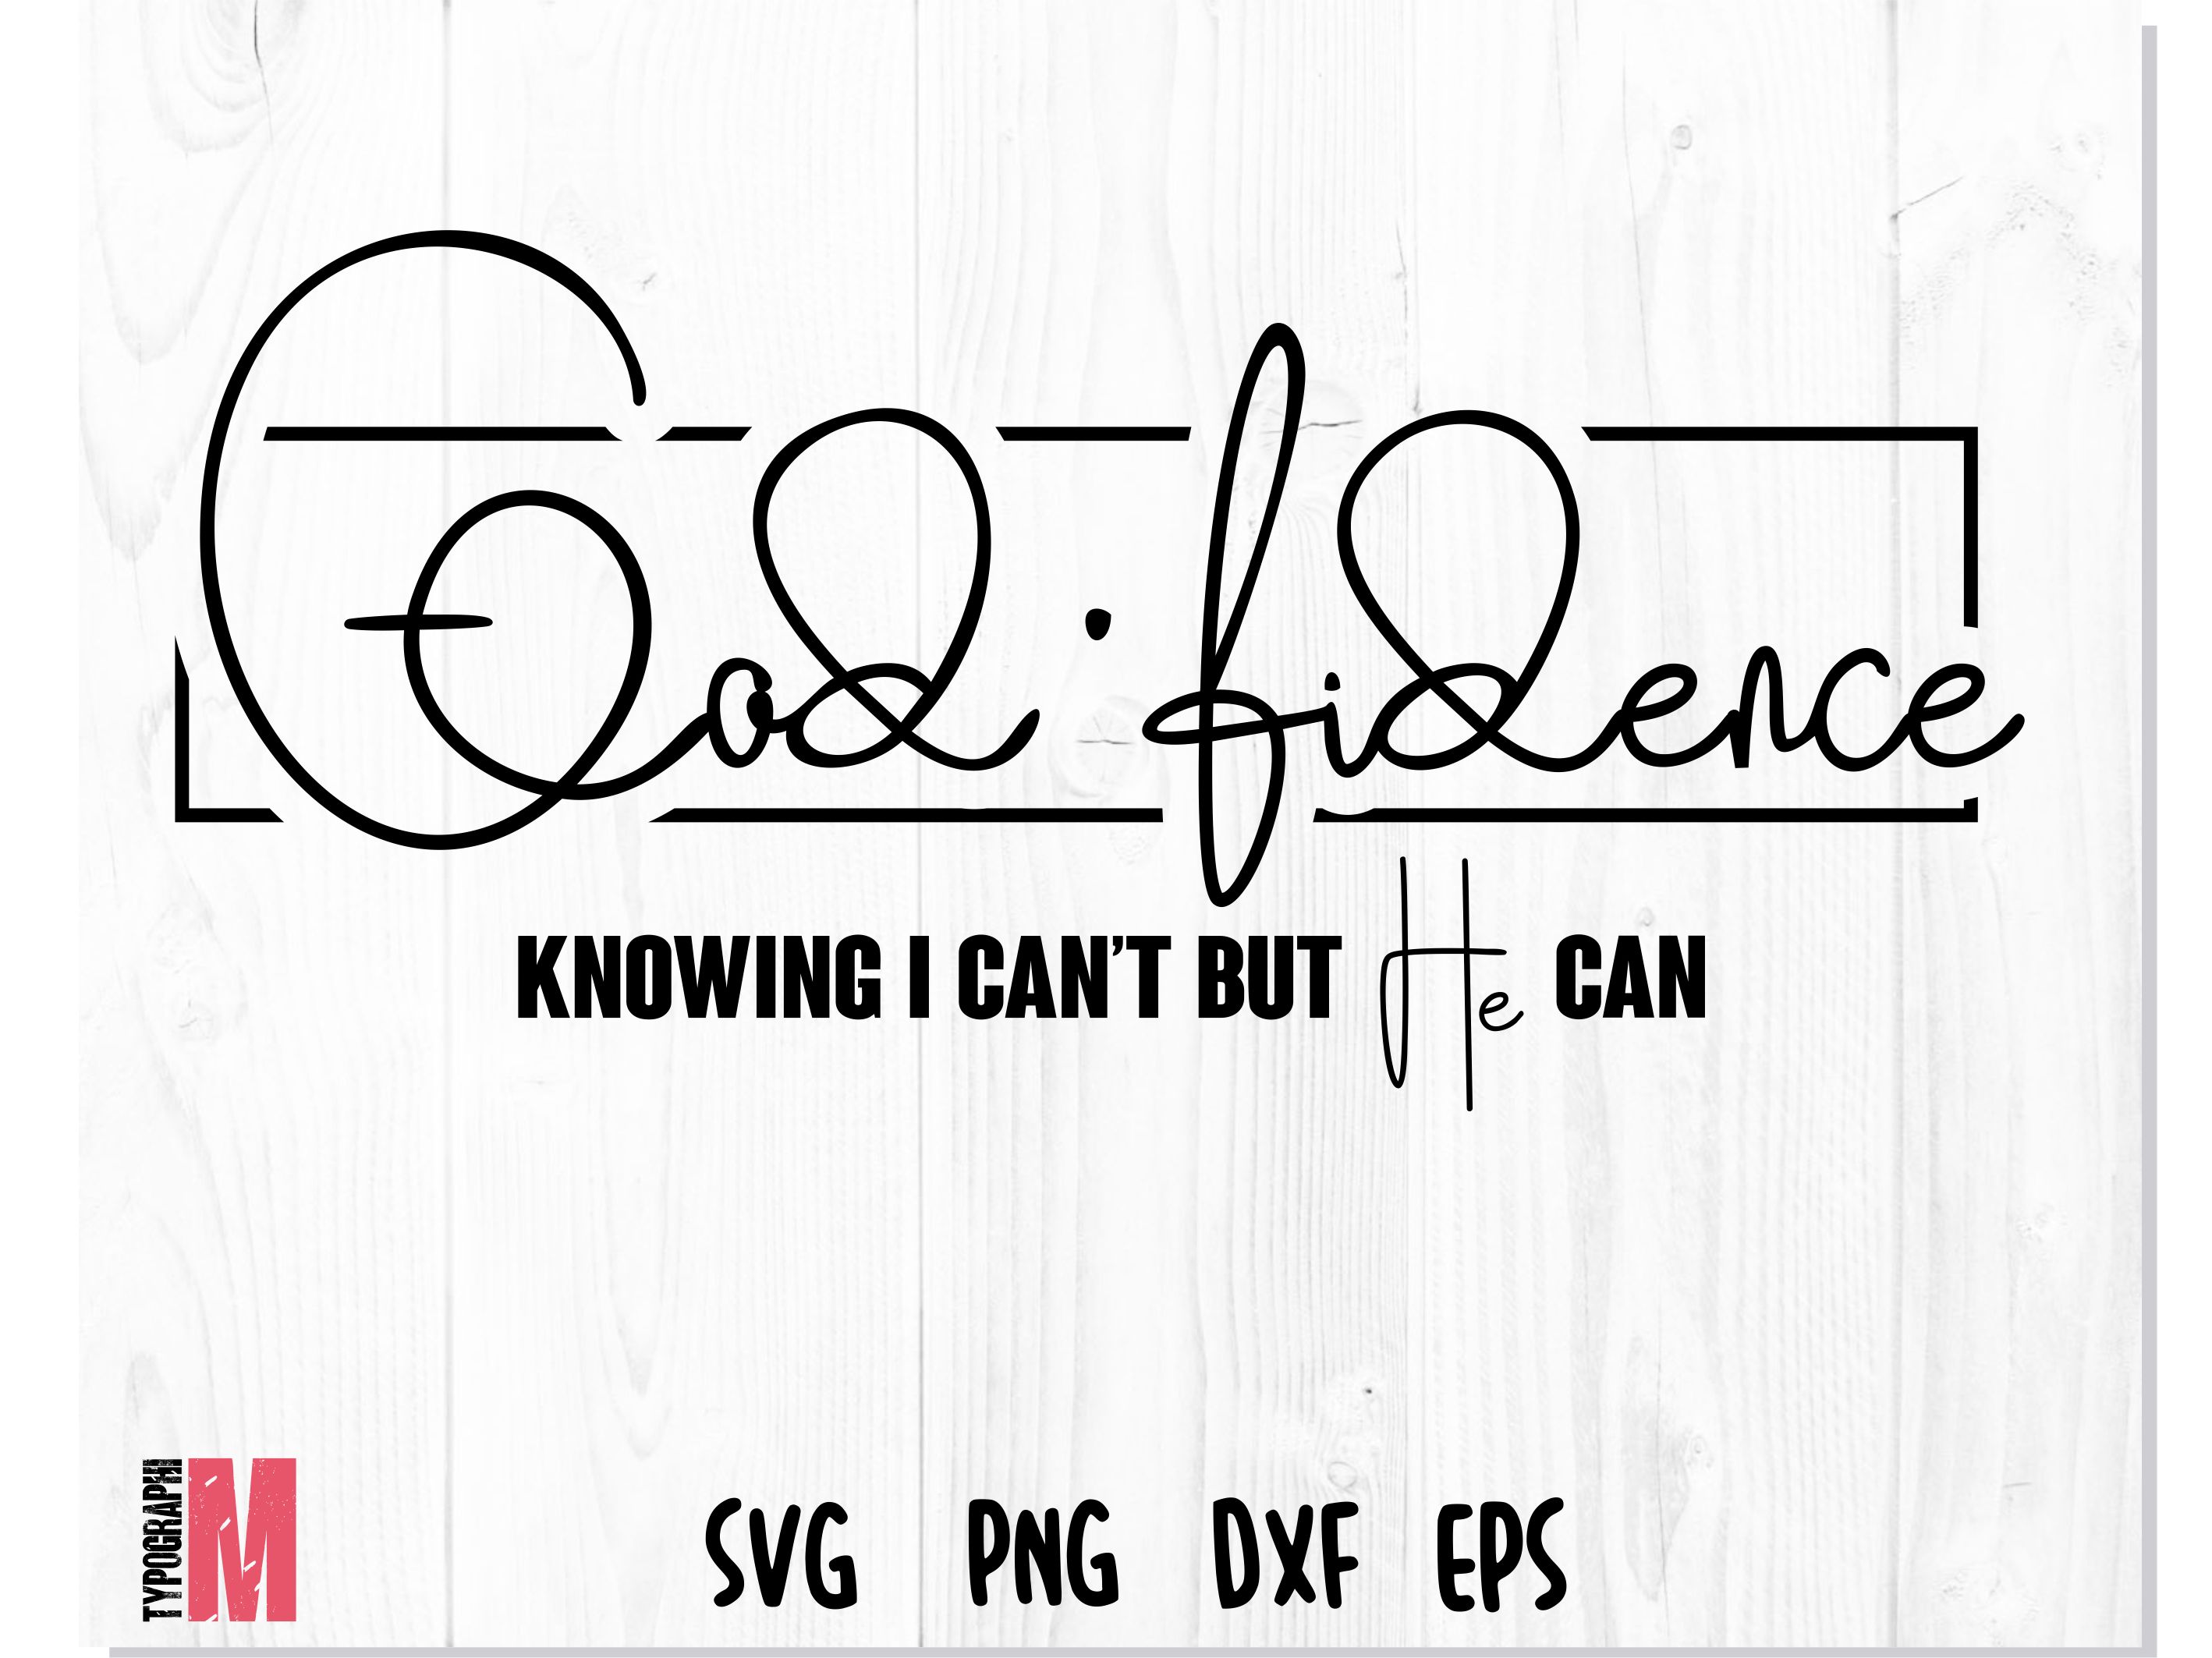 Download Godfidence Svg Godfidence Svg Cut File Christian Svg Files For Shirts Bible Verse Svg Religious Svg Hand Lettered Scripture Design Bible Verses Decor Sign Vectorency